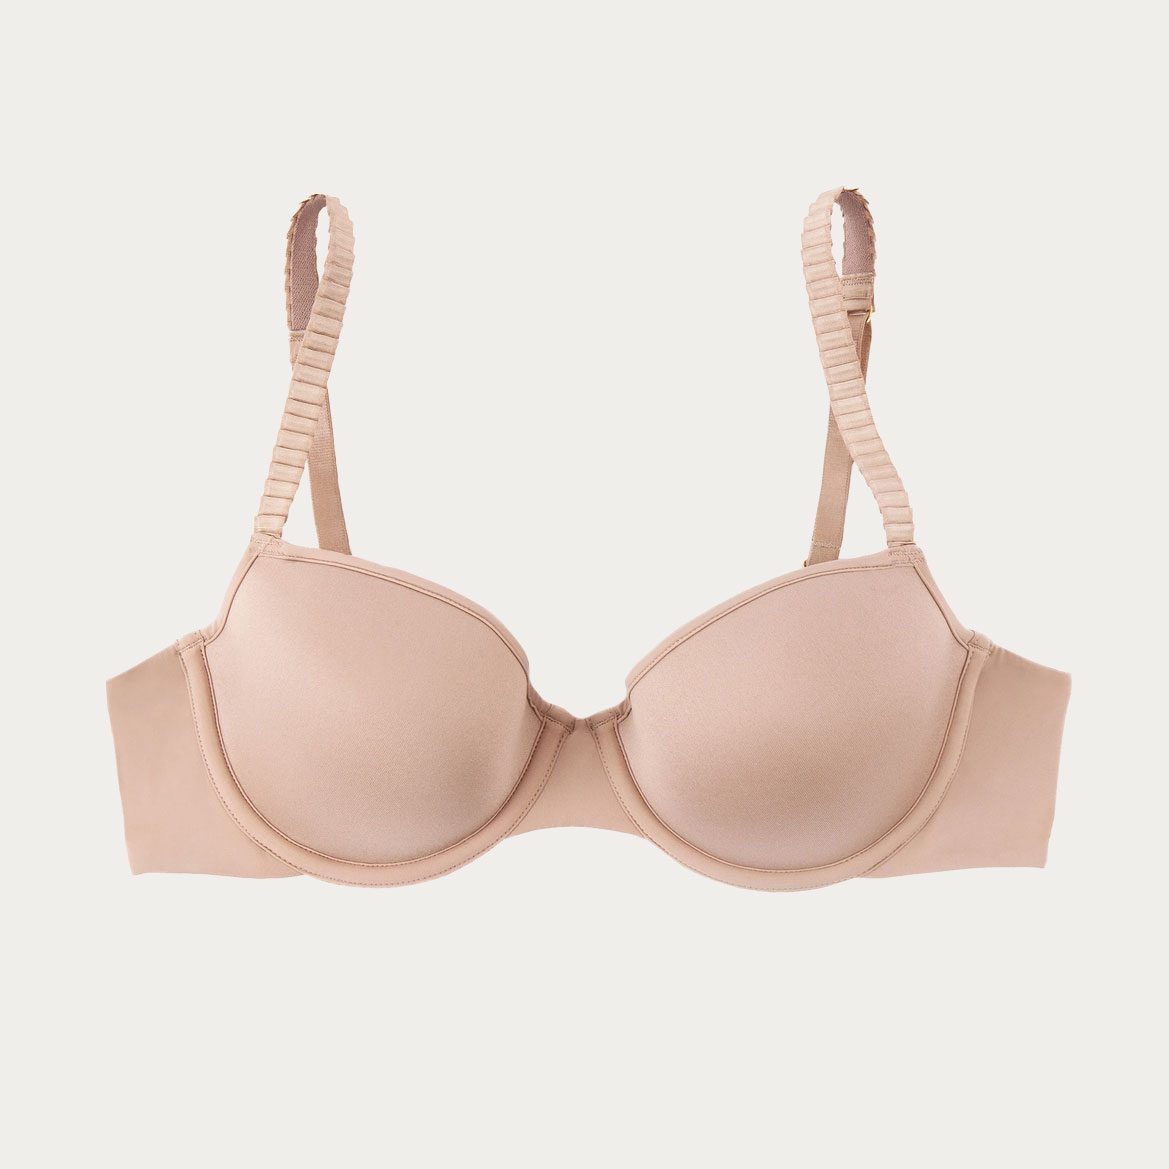 Can I Wear an Underwire Bra through Airport Security?